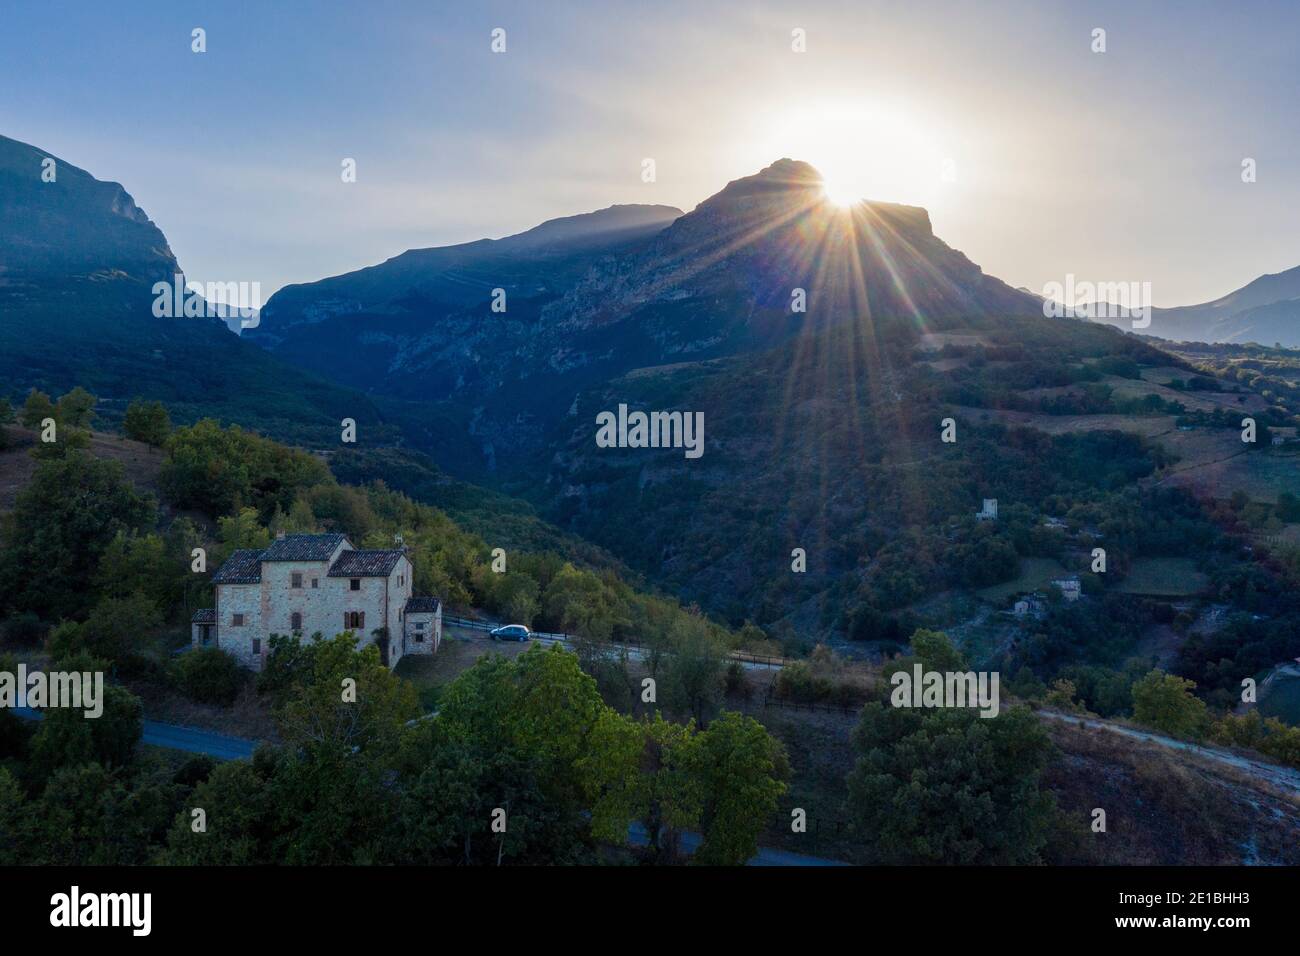 Typical Italian villa on the hills near Amandola, Marche region, Italy. Scenic countryside landscape during a beautiful sunset Stock Photo